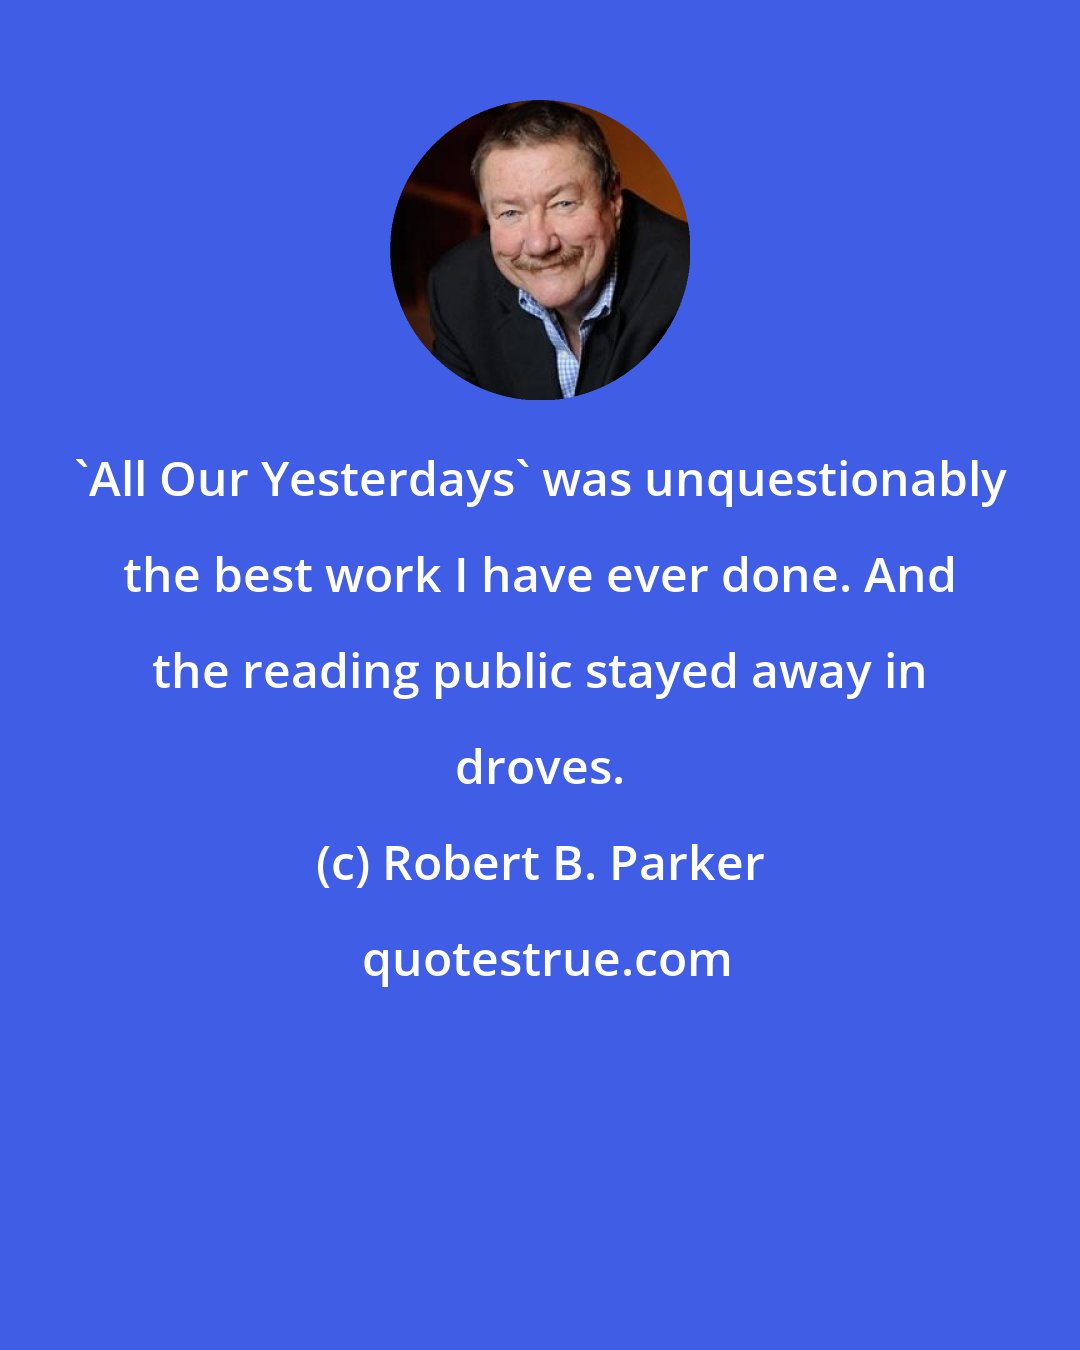 Robert B. Parker: 'All Our Yesterdays' was unquestionably the best work I have ever done. And the reading public stayed away in droves.